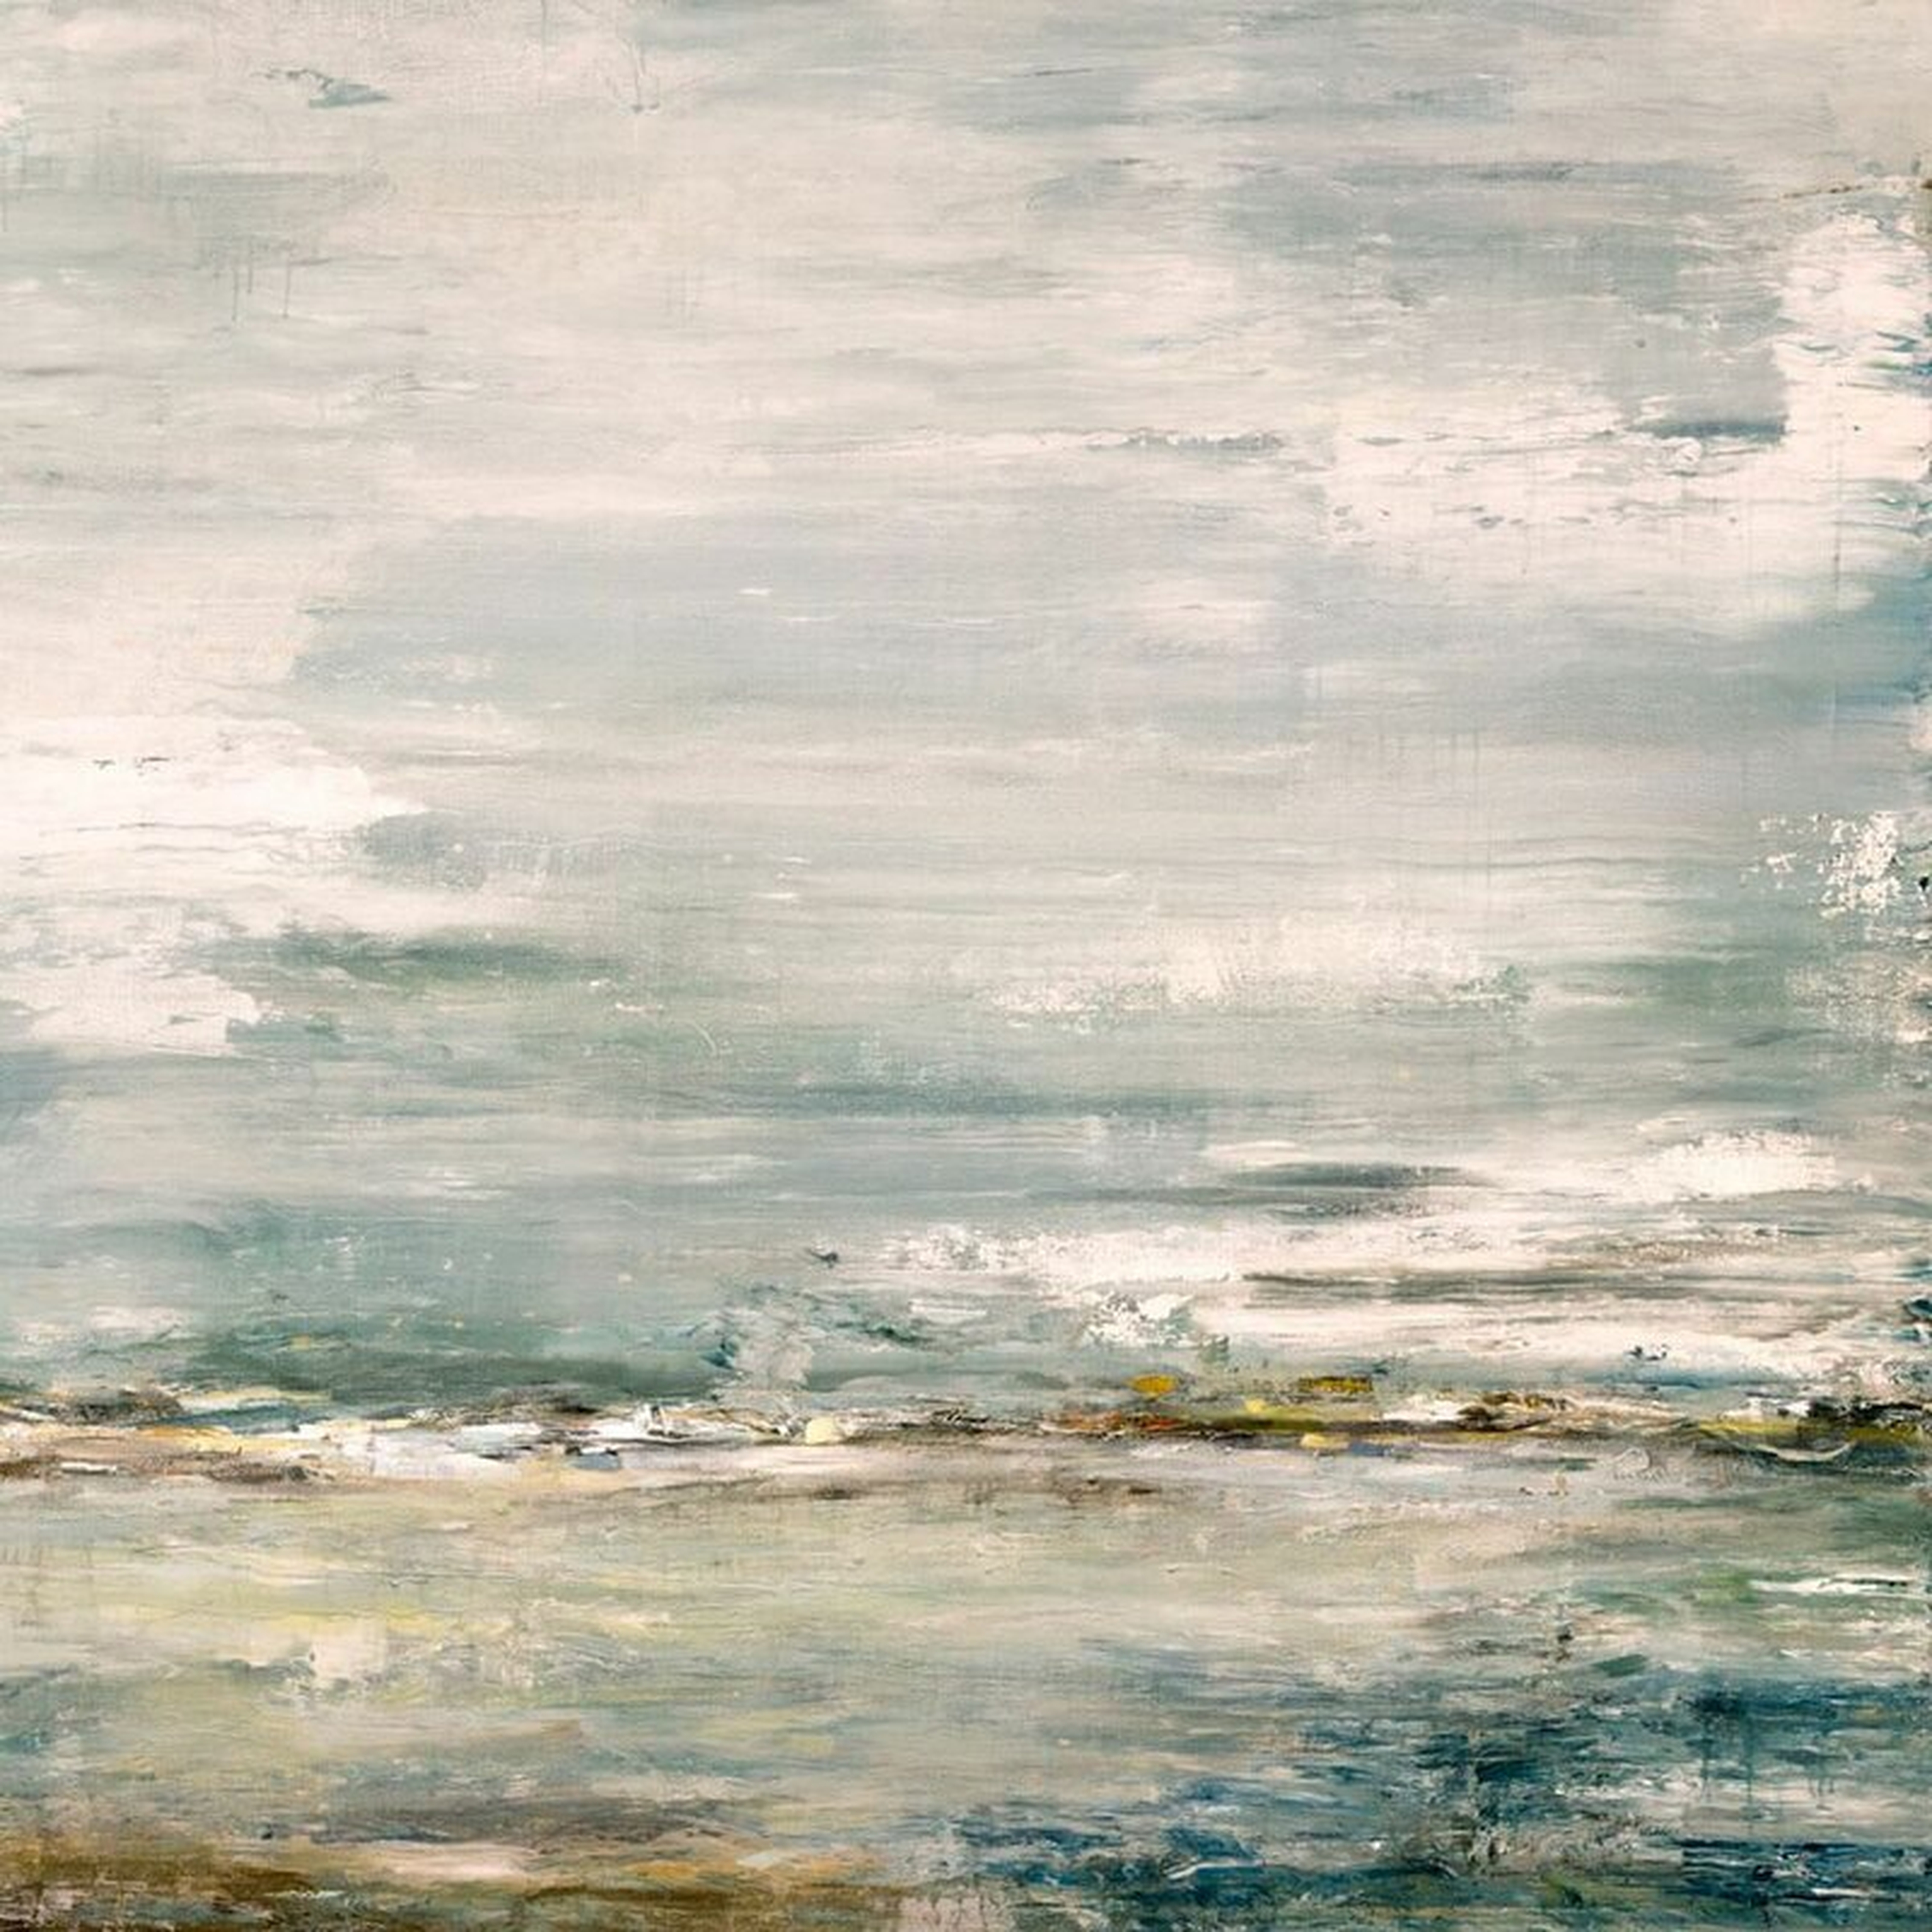 John Beard Collection 'Sea and Sky' Painting on Canvas Size: 48" H x 48" W x 1.5" D - Perigold